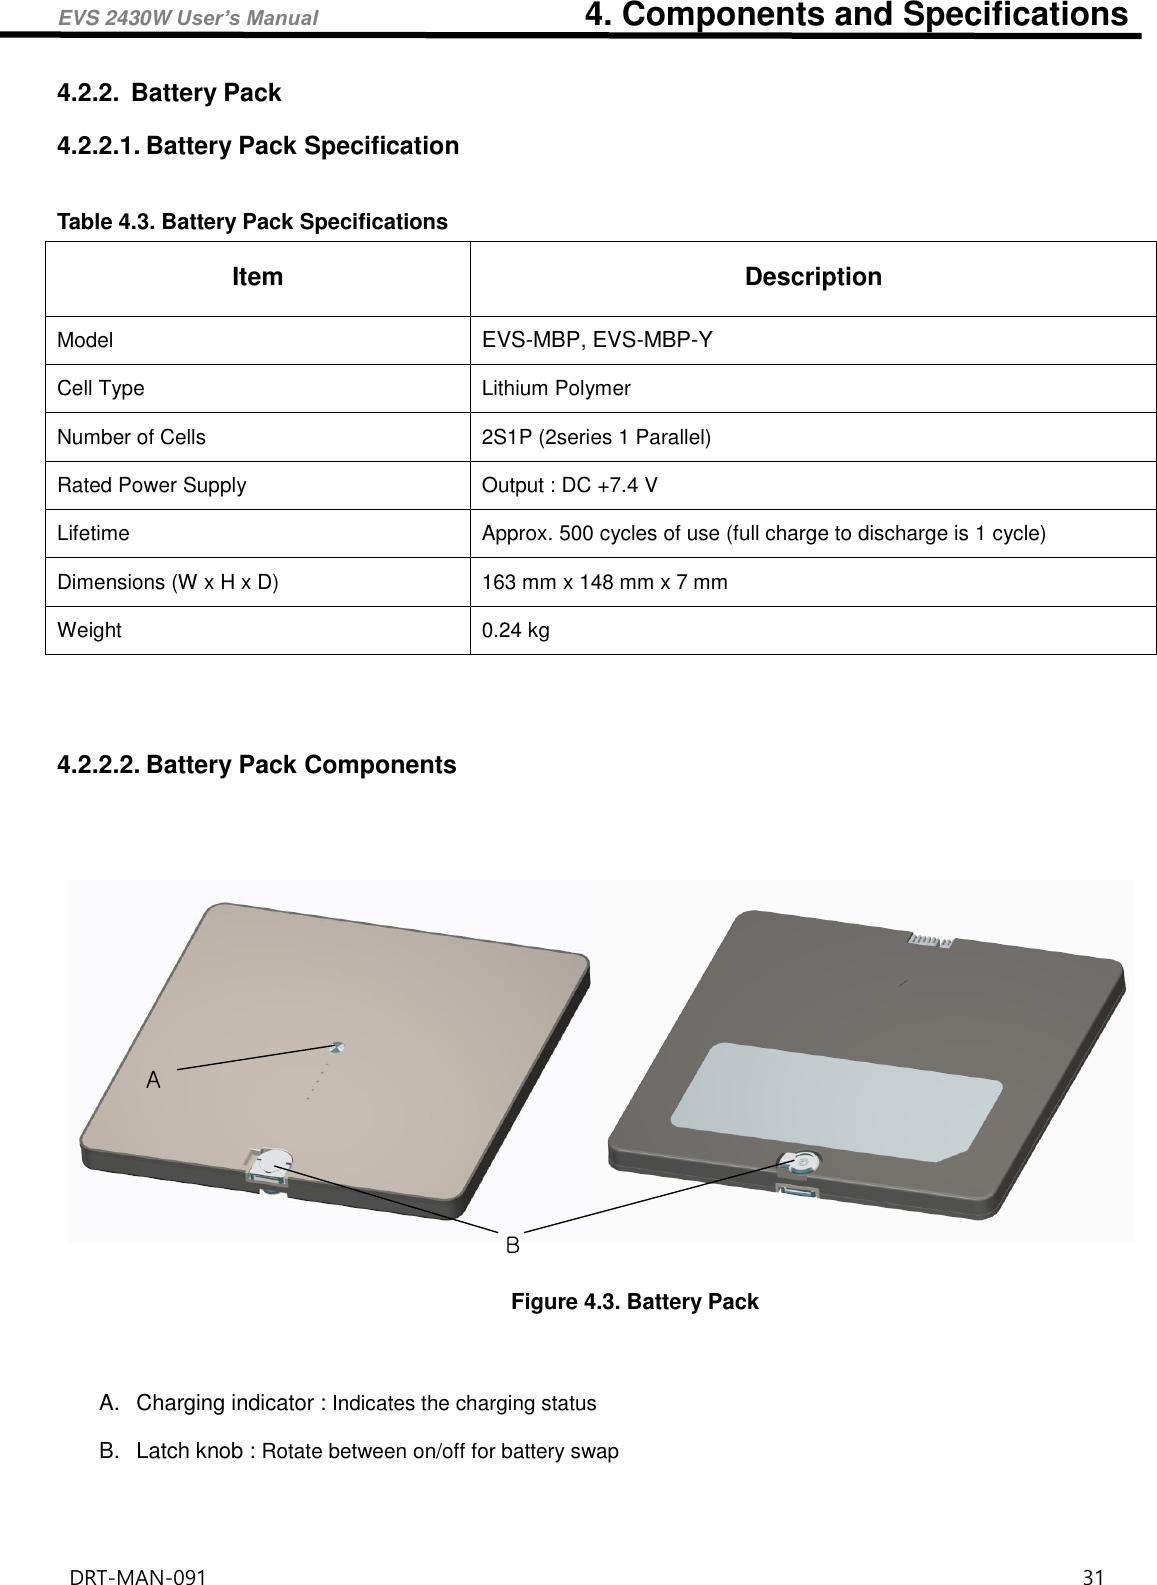 EVS 2430W User’s Manual                                4. Components and Specifications DRT-MAN-091                                                                                    31   4.2.2.  Battery Pack 4.2.2.1. Battery Pack Specification  Table 4.3. Battery Pack Specifications Item Description Model EVS-MBP, EVS-MBP-Y Cell Type   Lithium Polymer     Number of Cells 2S1P (2series 1 Parallel) Rated Power Supply Output : DC +7.4 V   Lifetime Approx. 500 cycles of use (full charge to discharge is 1 cycle)   Dimensions (W x H x D) 163 mm x 148 mm x 7 mm Weight 0.24 kg     4.2.2.2. Battery Pack Components    AB Figure 4.3. Battery Pack    A.  Charging indicator : Indicates the charging status  B.  Latch knob : Rotate between on/off for battery swap    